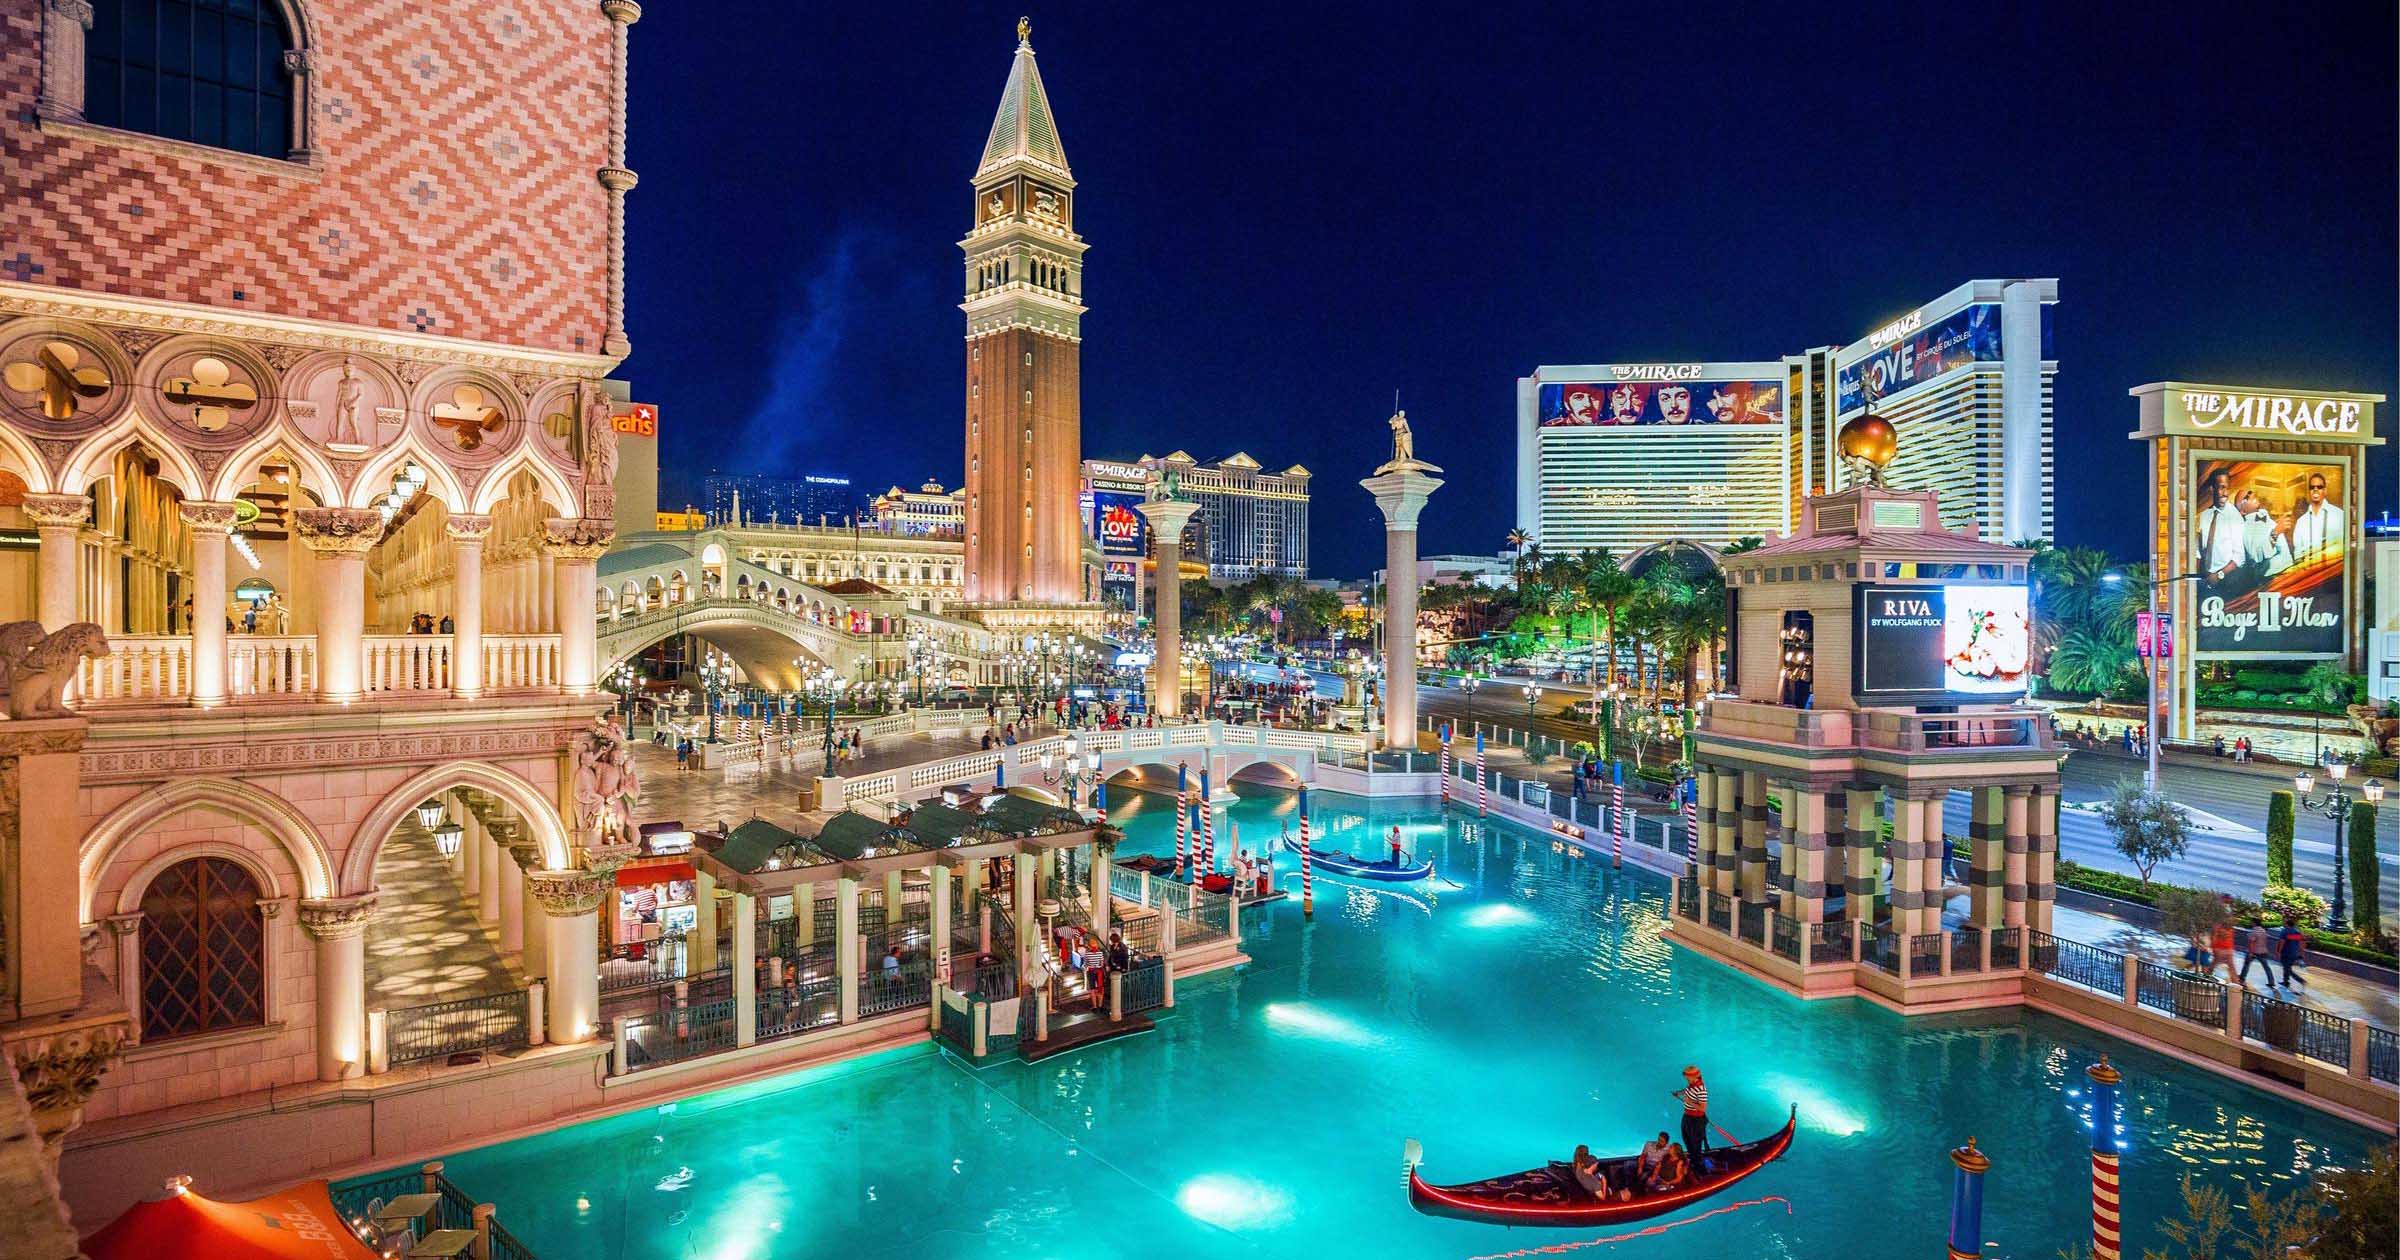 Venetian Las Vegas hotels - Arguably most imposing casino on the Strip and a luxury hotel